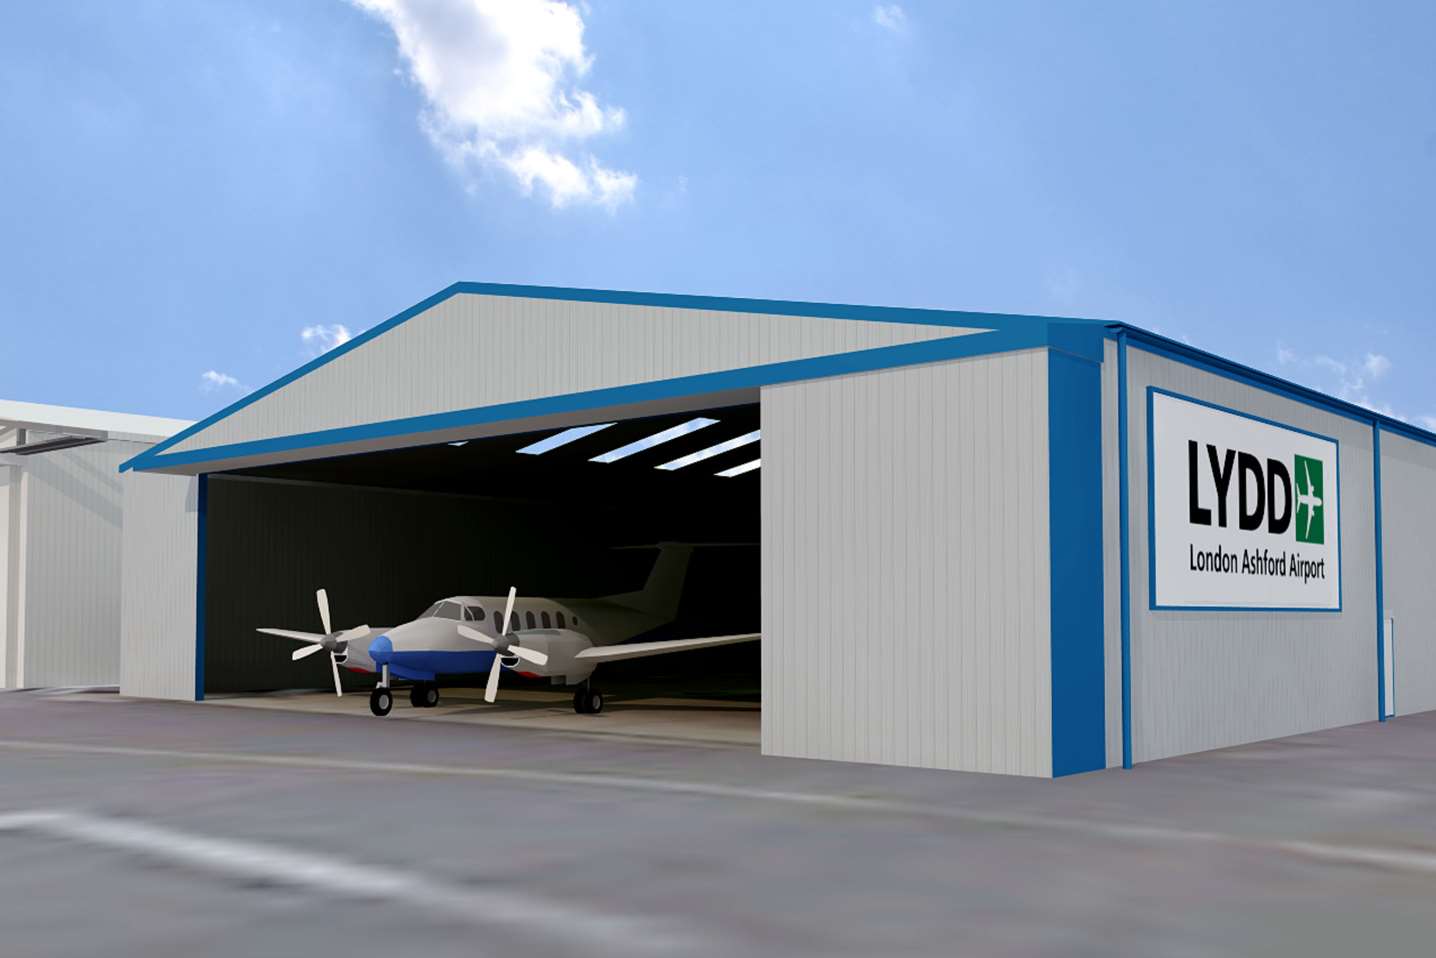 An artist's impressions of the planned hangar at Lydd airport